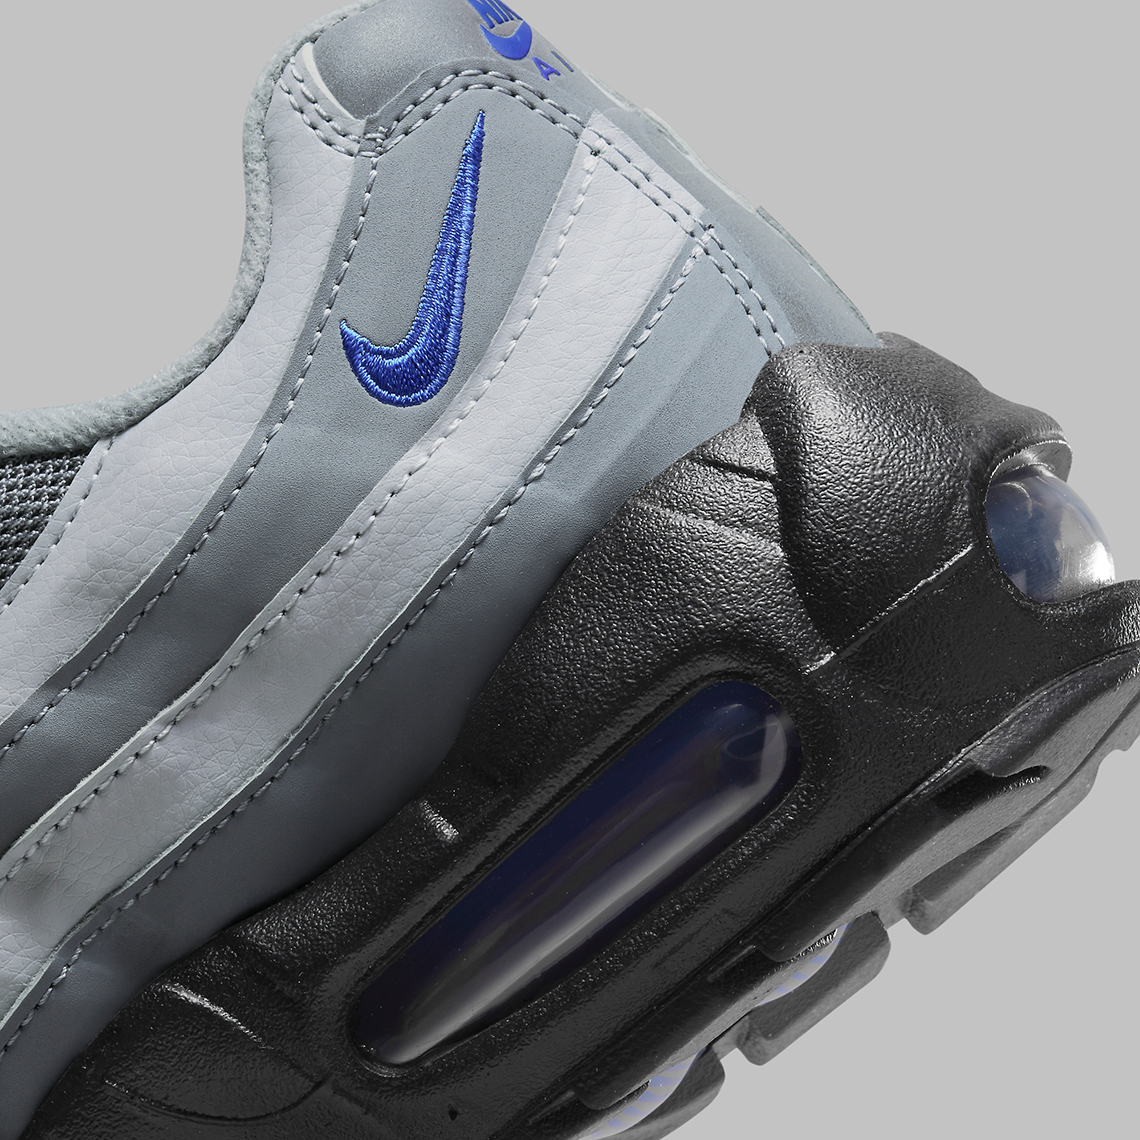 Supreme and Nike will be expanding their partnership into 2022 with a trio of Shox Ride 2s Gs Grey Black Royal Fd9764 001 4